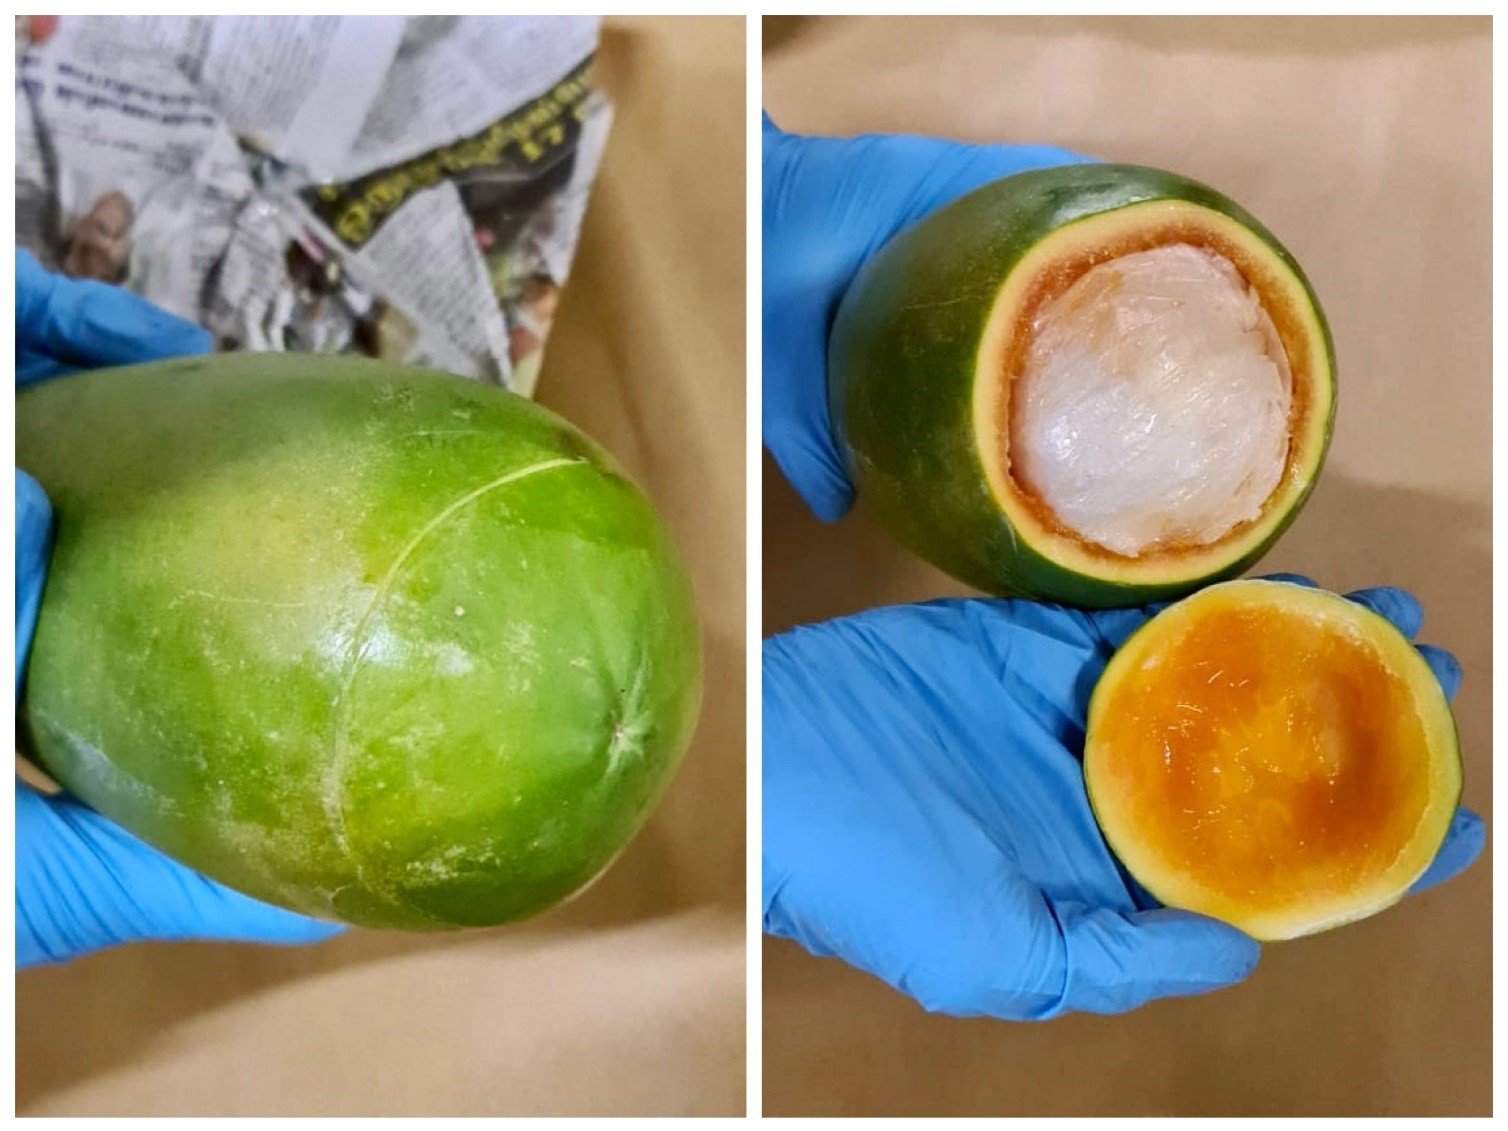 Photos 3 and 4: A papaya used to conceal ‘Ice’ and ketamine, seized from a vehicle in the vicinity of River Valley Road on 17 September 2020